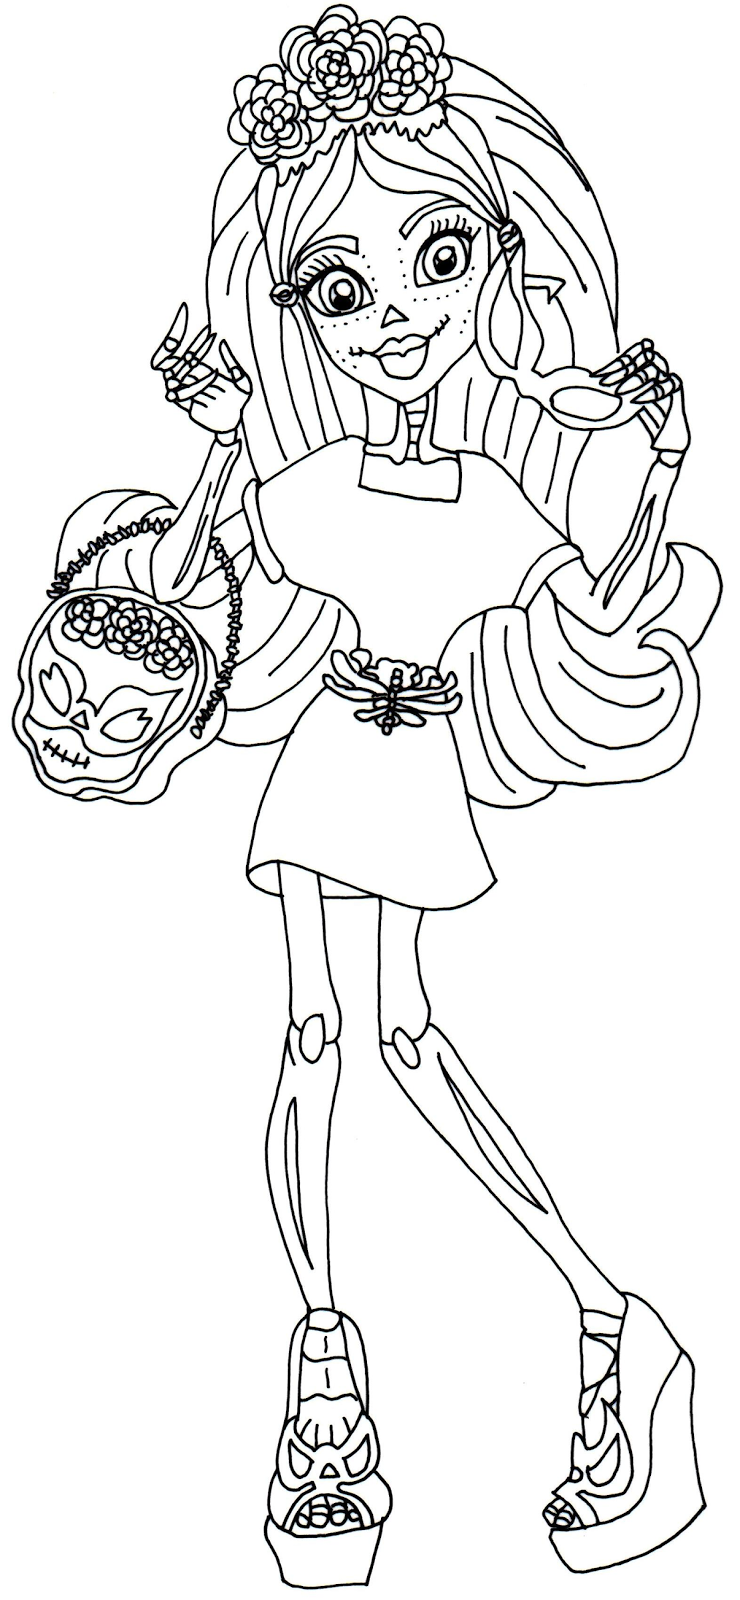 Free Printable Monster High Coloring Pages: April 2014